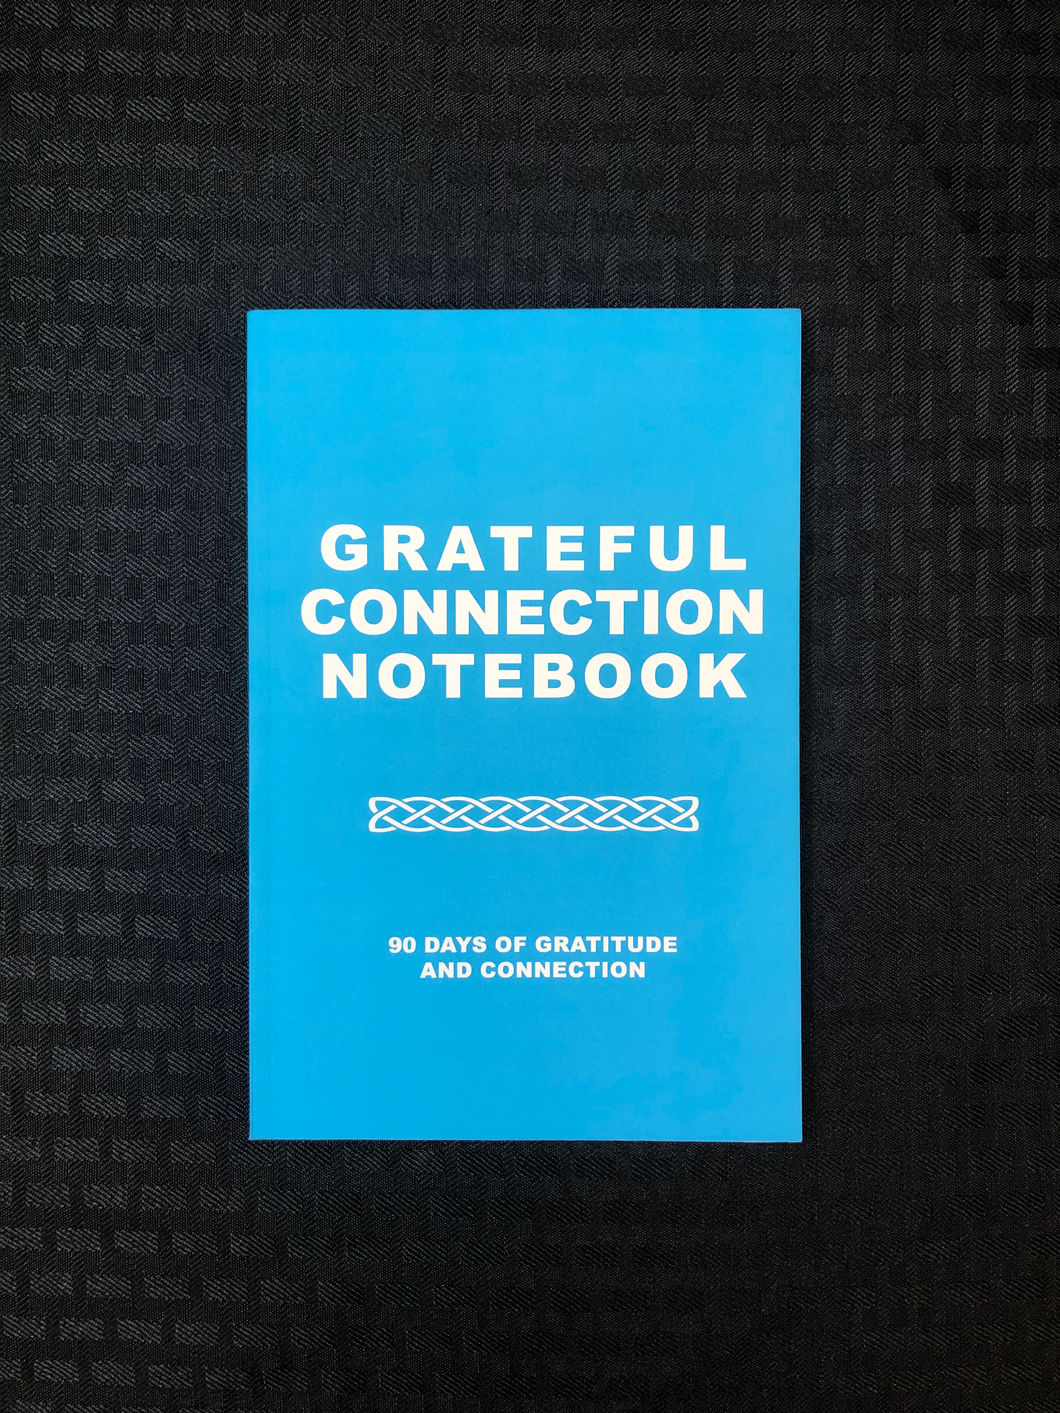 Grateful Connection Notebook - 90 Days of Gratitude and Connection